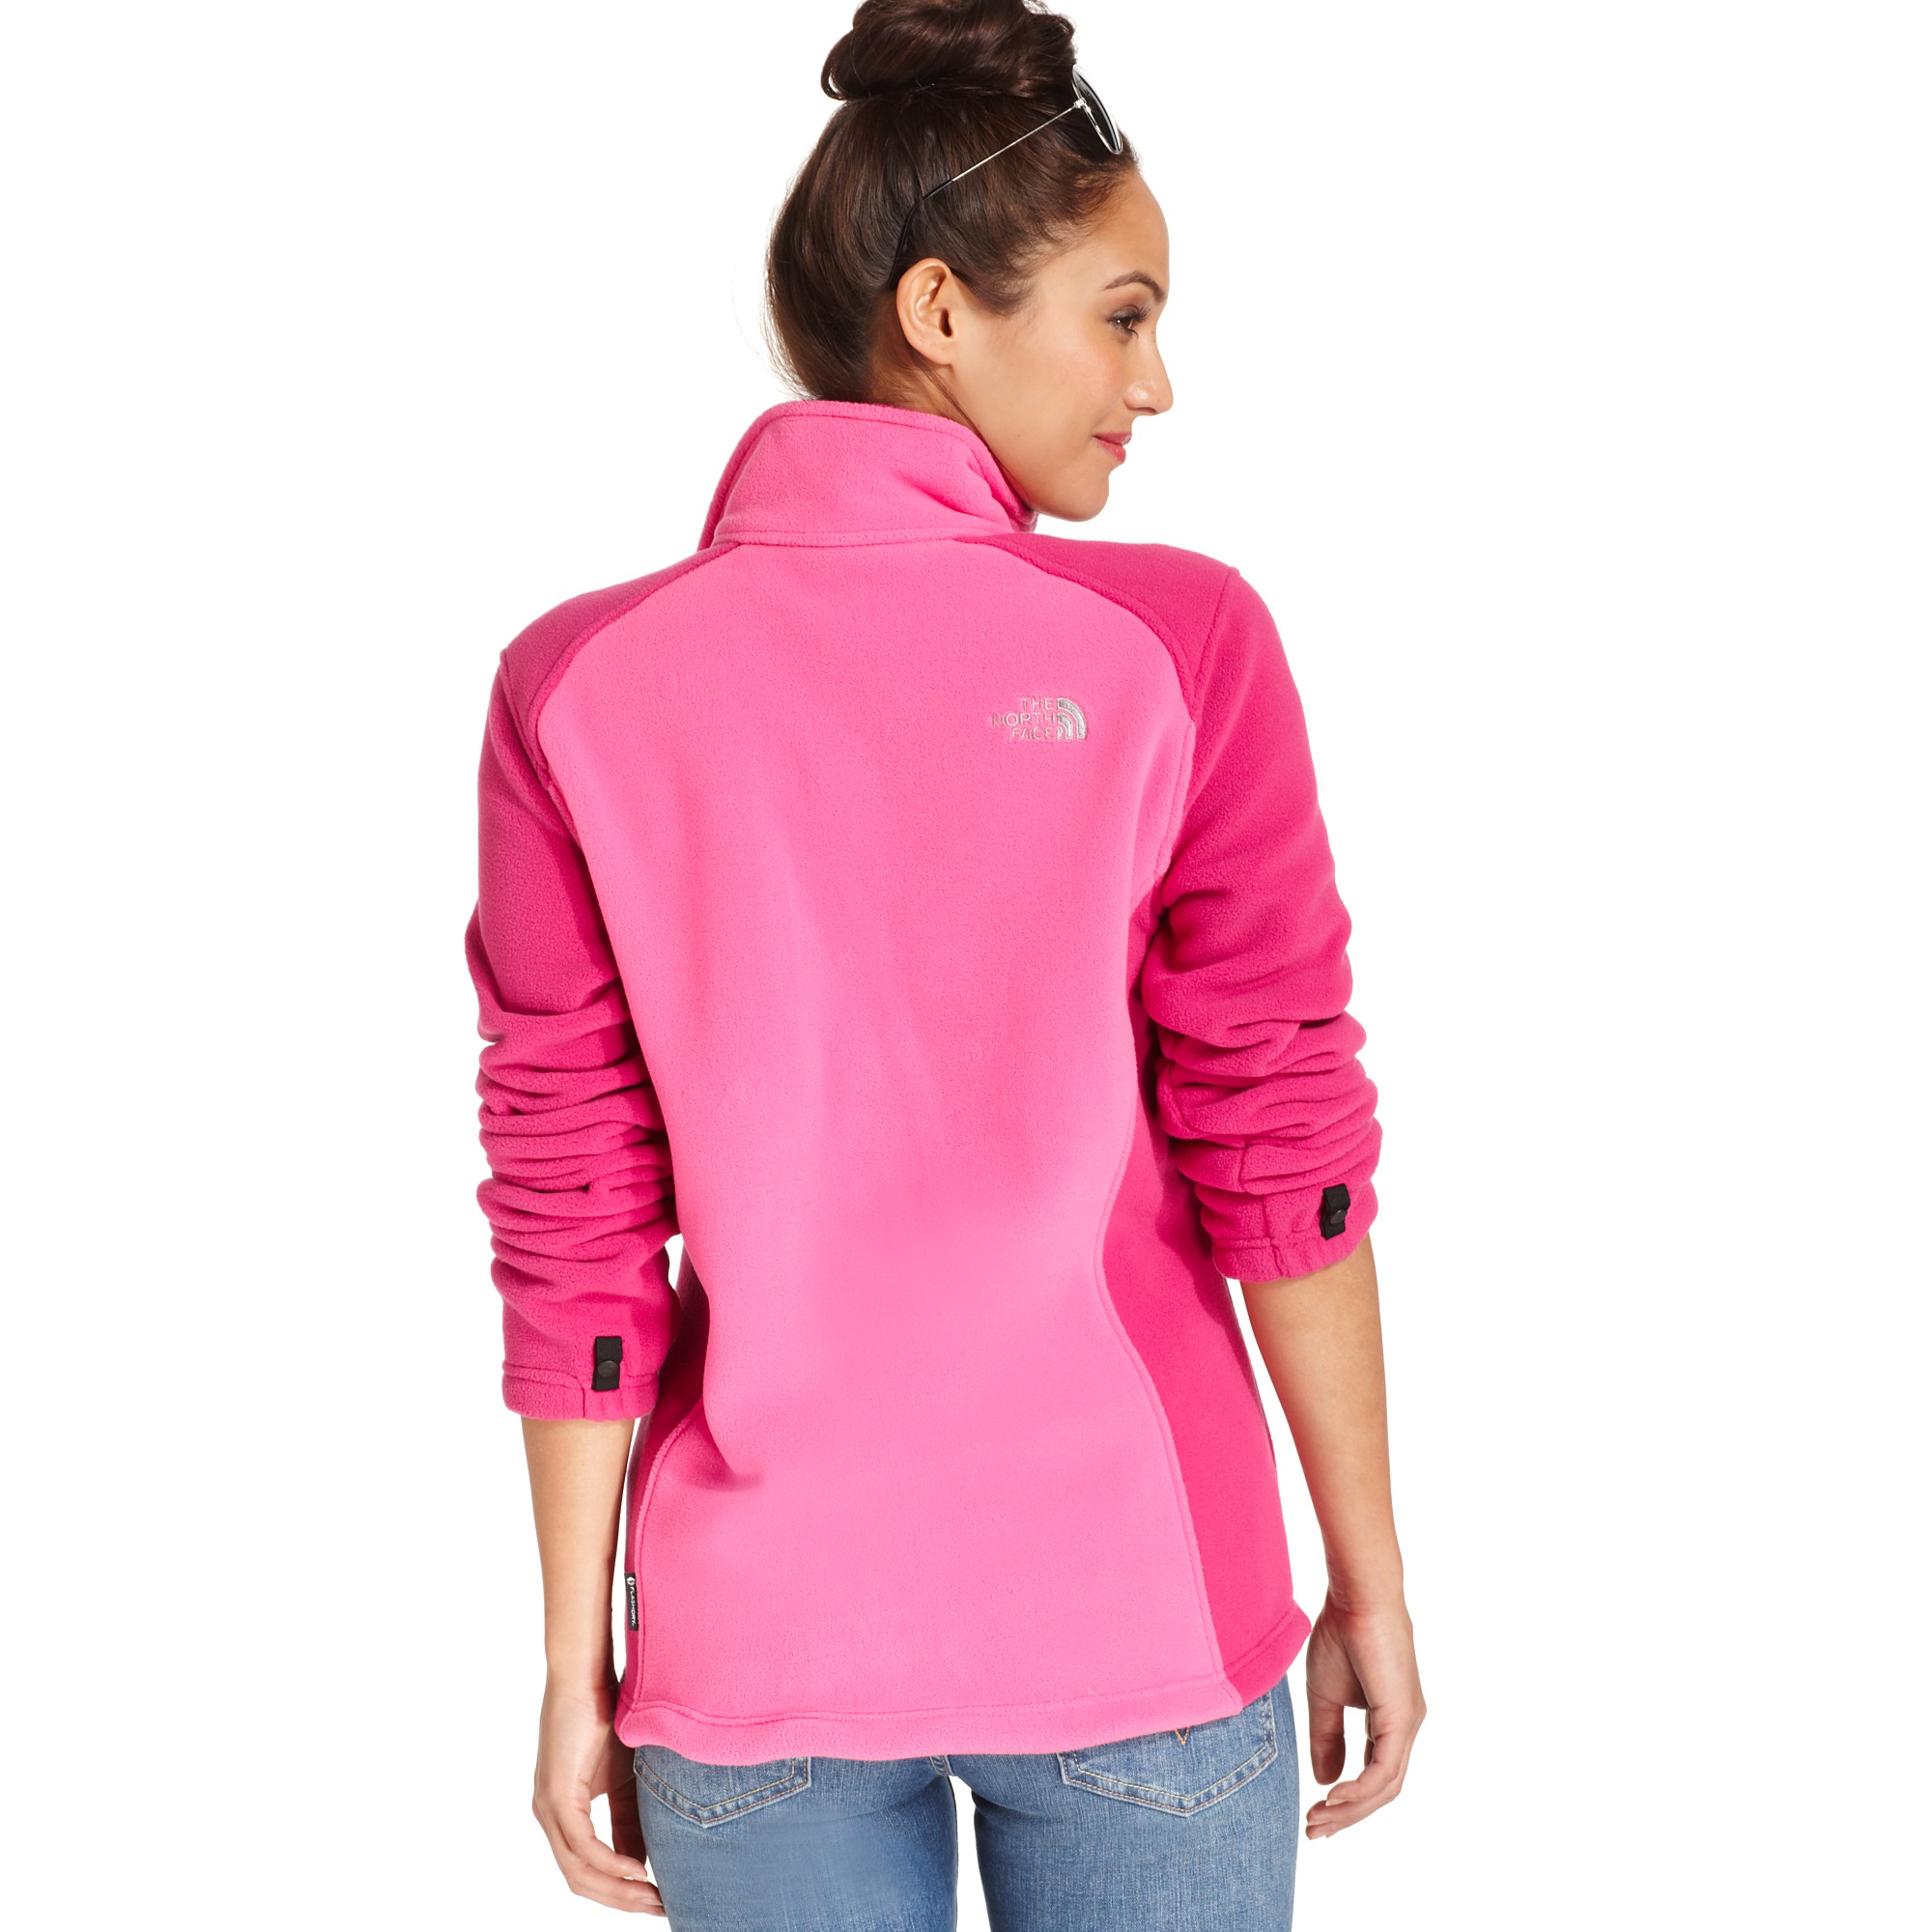 The North Face Rdt 300 Flashdry Colorblocked Fleece in Pink